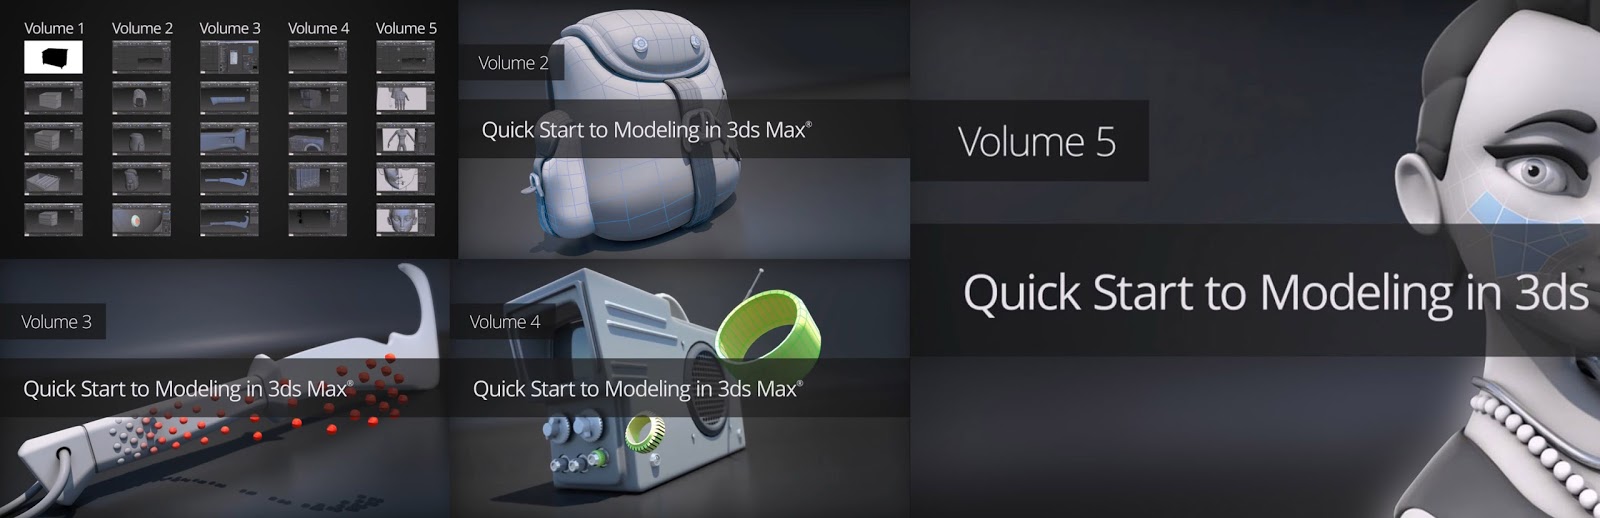 [Digital Tutors] Quick Start to Modeling in 3ds Max [ENG-RUS].jpg